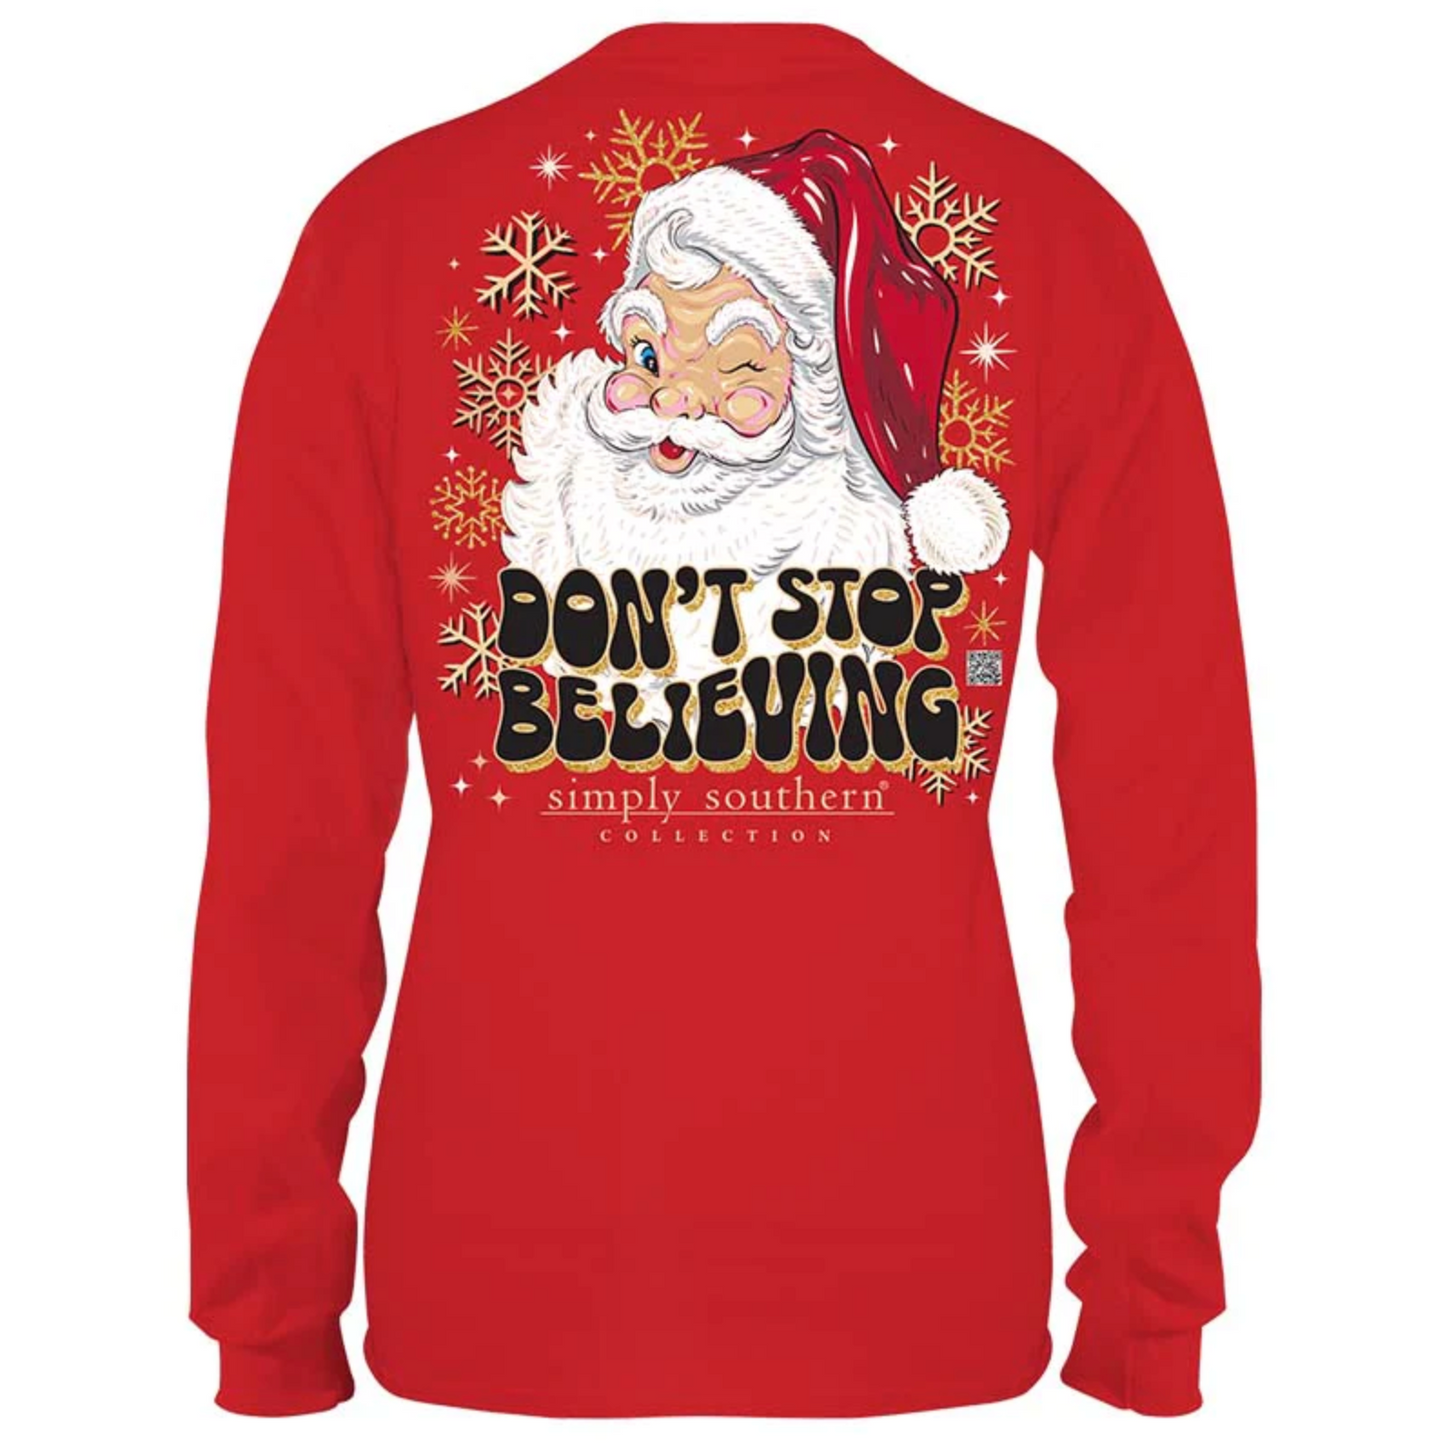 Simply Southern "Don't Stop Believing" T-Shirt-YOUTH - The Street Boutique 